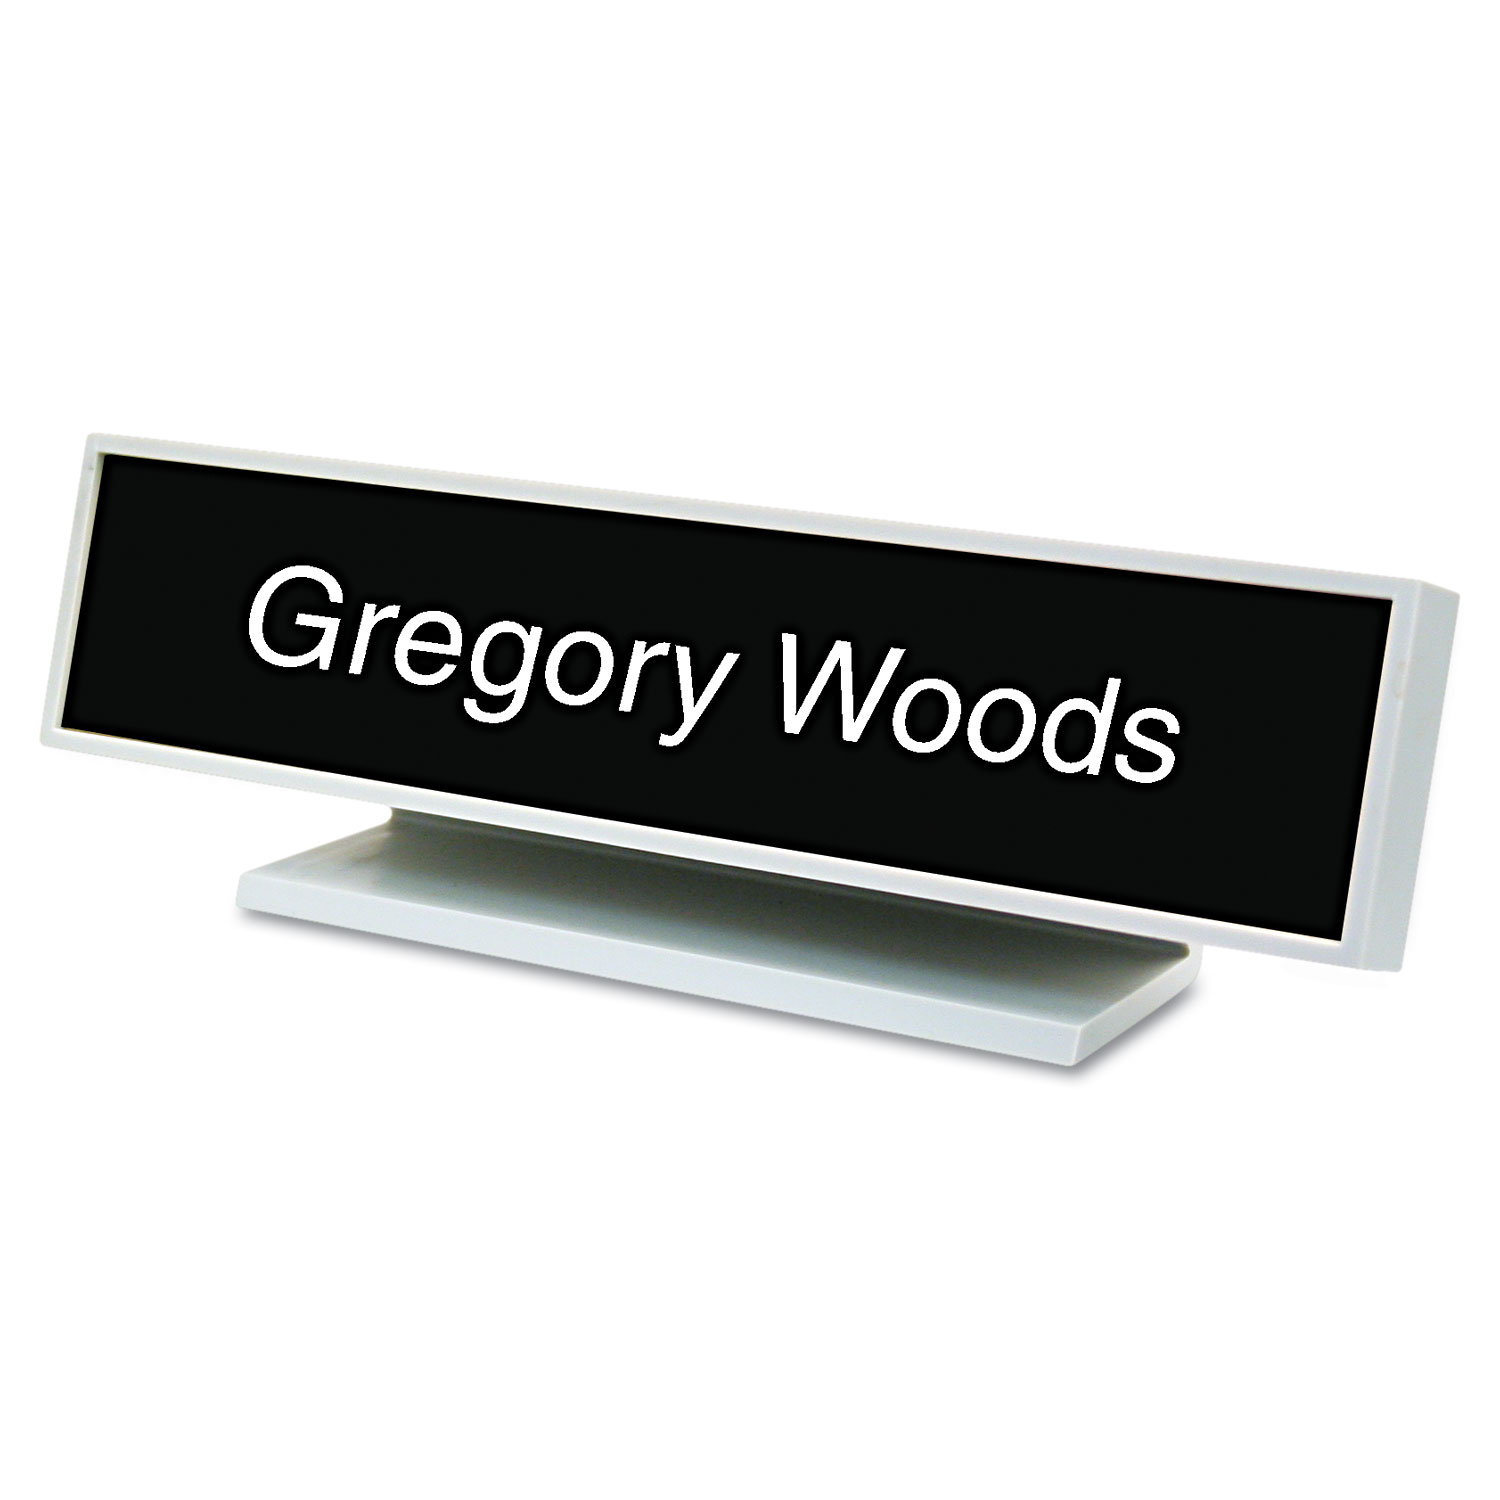  Identity Group 5701 Architectural Desk Sign with Name Plate, Gray, Square Radius (USS5701) 